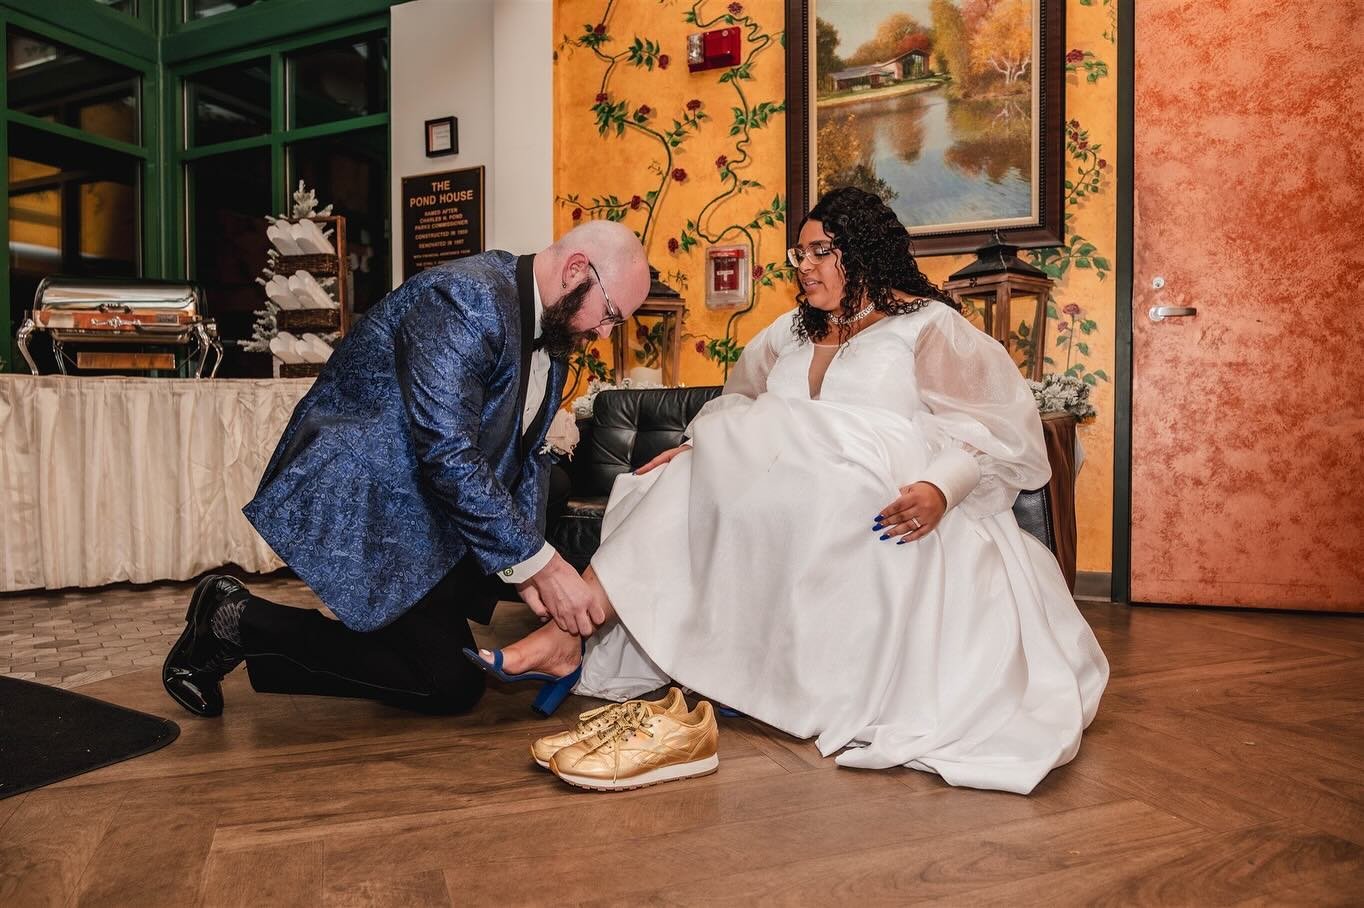 Having your partner help you change into your Wonder Woman sneakers to dance the rest of the night away &gt;&gt;&gt;&gt;

Peep the cuff links too 👏

Hotel @avonoldfarmshotel 
Venue @pondhouseweddings @pondhousecafe 
DJ @powerstationevents_weddings @